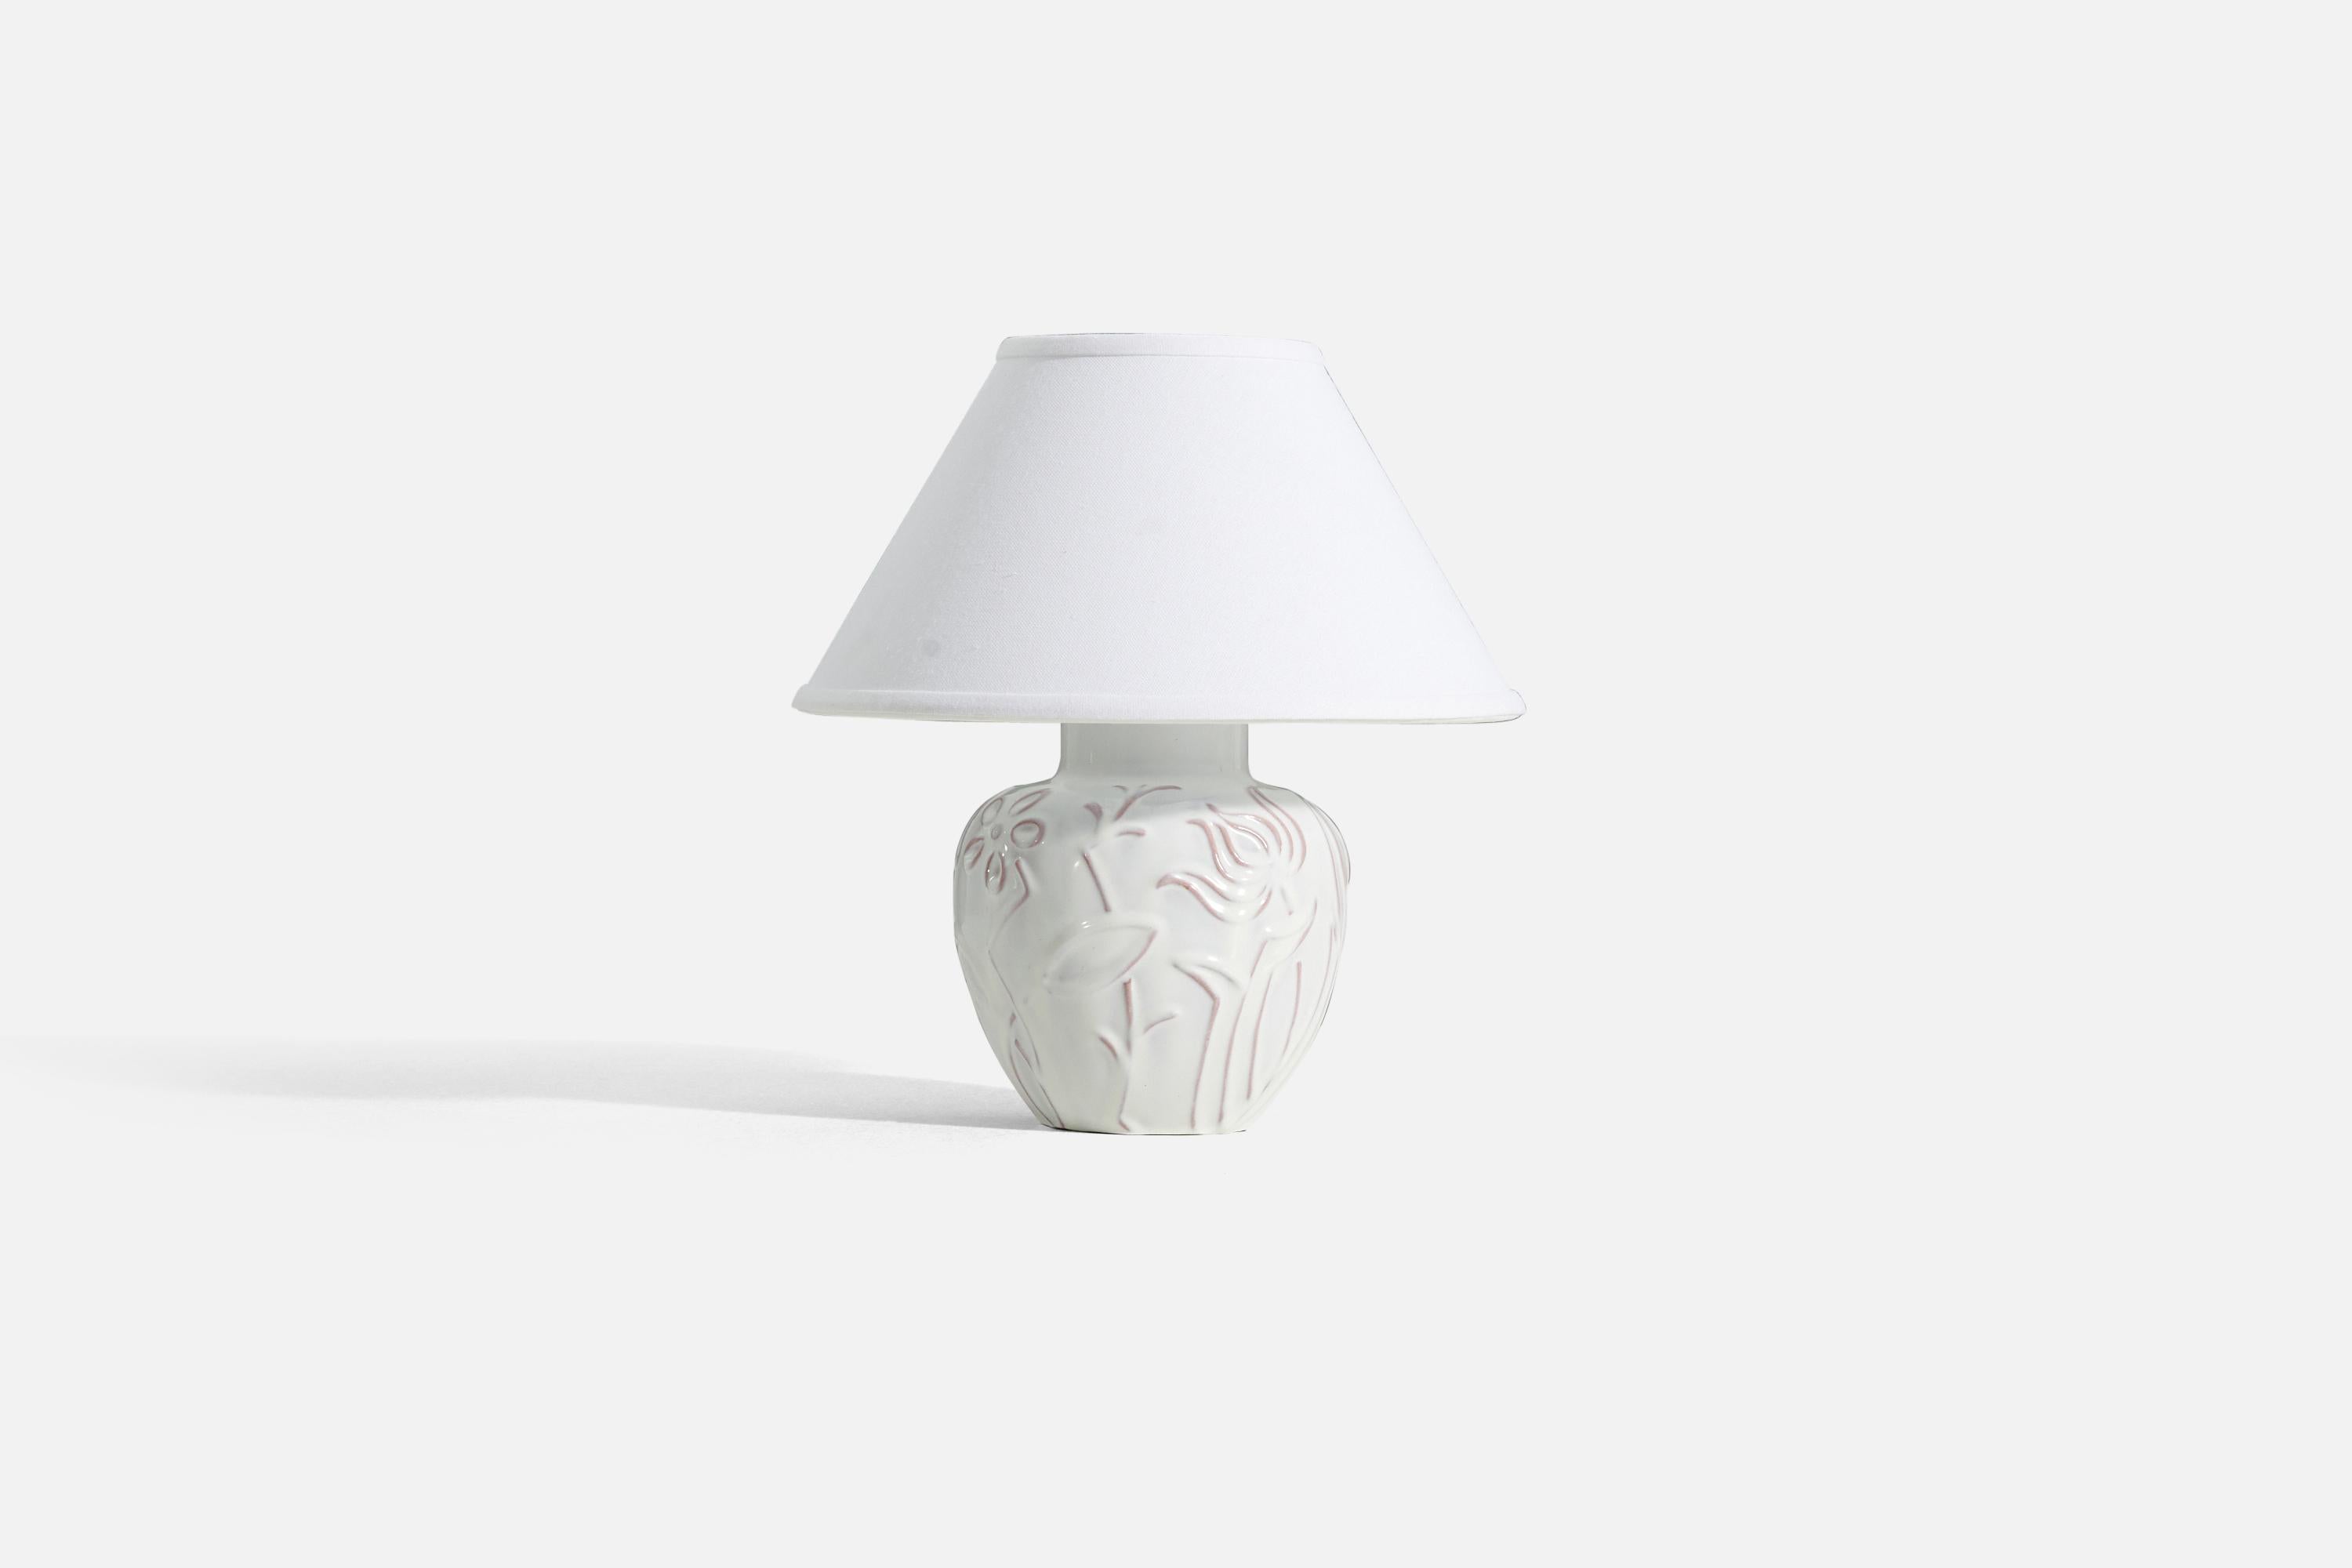 A white-glazed earthenware table lamp designed by Harald Östergren, produced by Upsala-Ekeby, Sweden, 1940s. Lamp features a floral / flower motif. 

Measurements listed are of lamp itself. Sold without lampshade.
Measurements of shade : 5 x